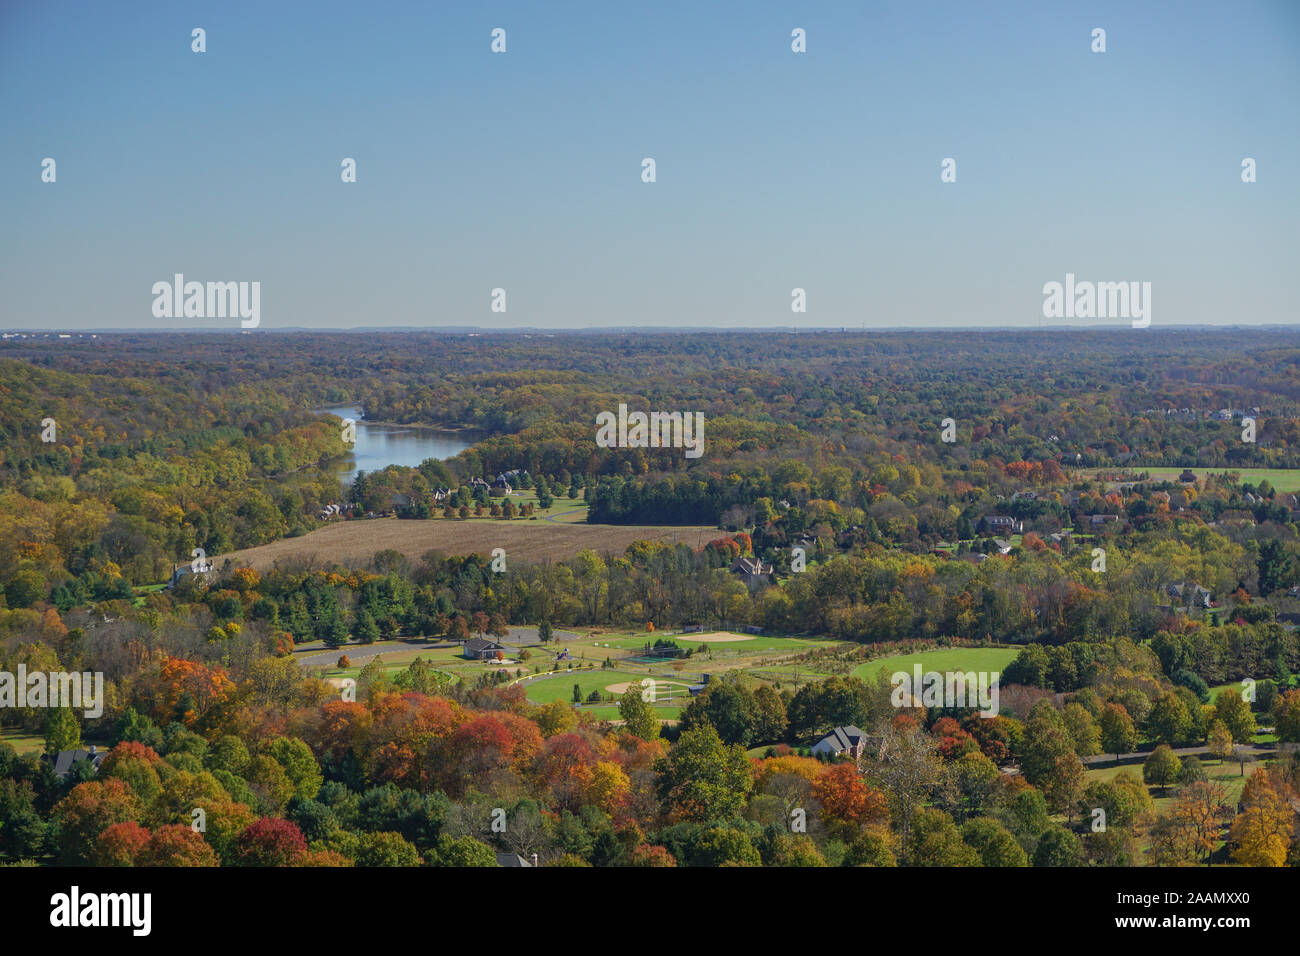 Washington Crossing, PA: View of the Delaware River and Pennsylvania countryside from Bowman's Hill Tower in Washington Crossing Historic Park. Stock Photo